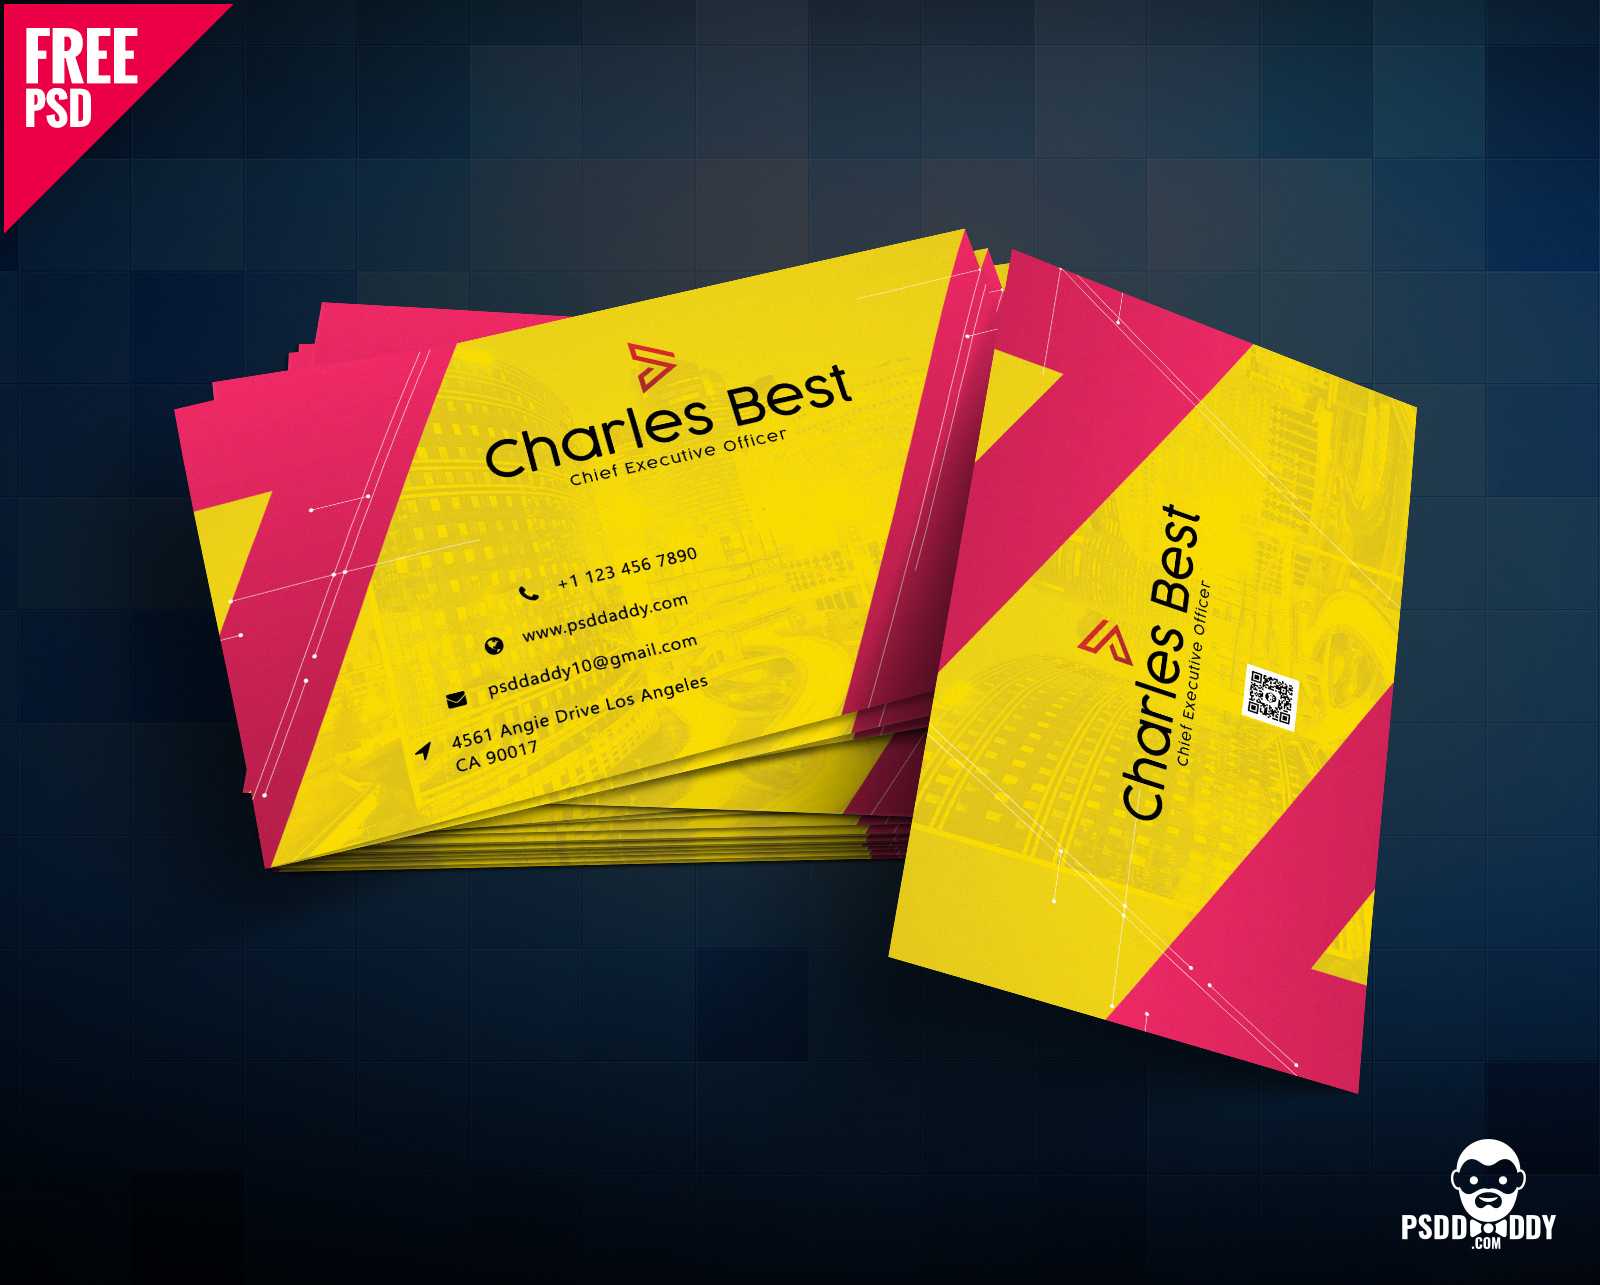 Download] Creative Business Card Free Psd | Psddaddy With Regard To Photoshop Cs6 Business Card Template